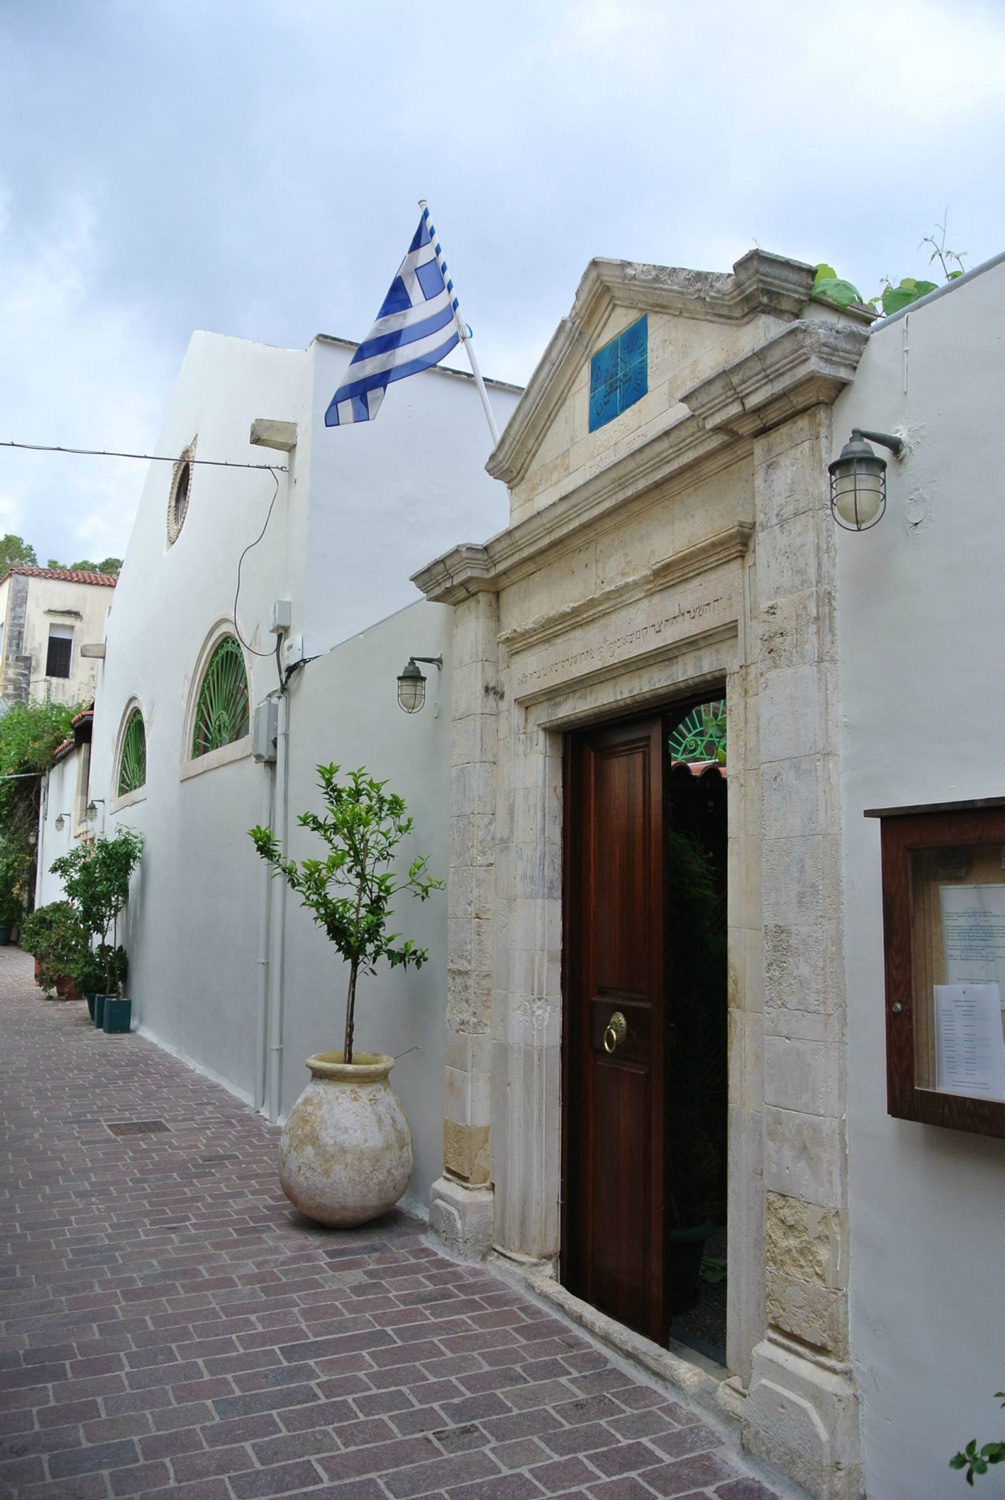 Outside view of the Synagogue